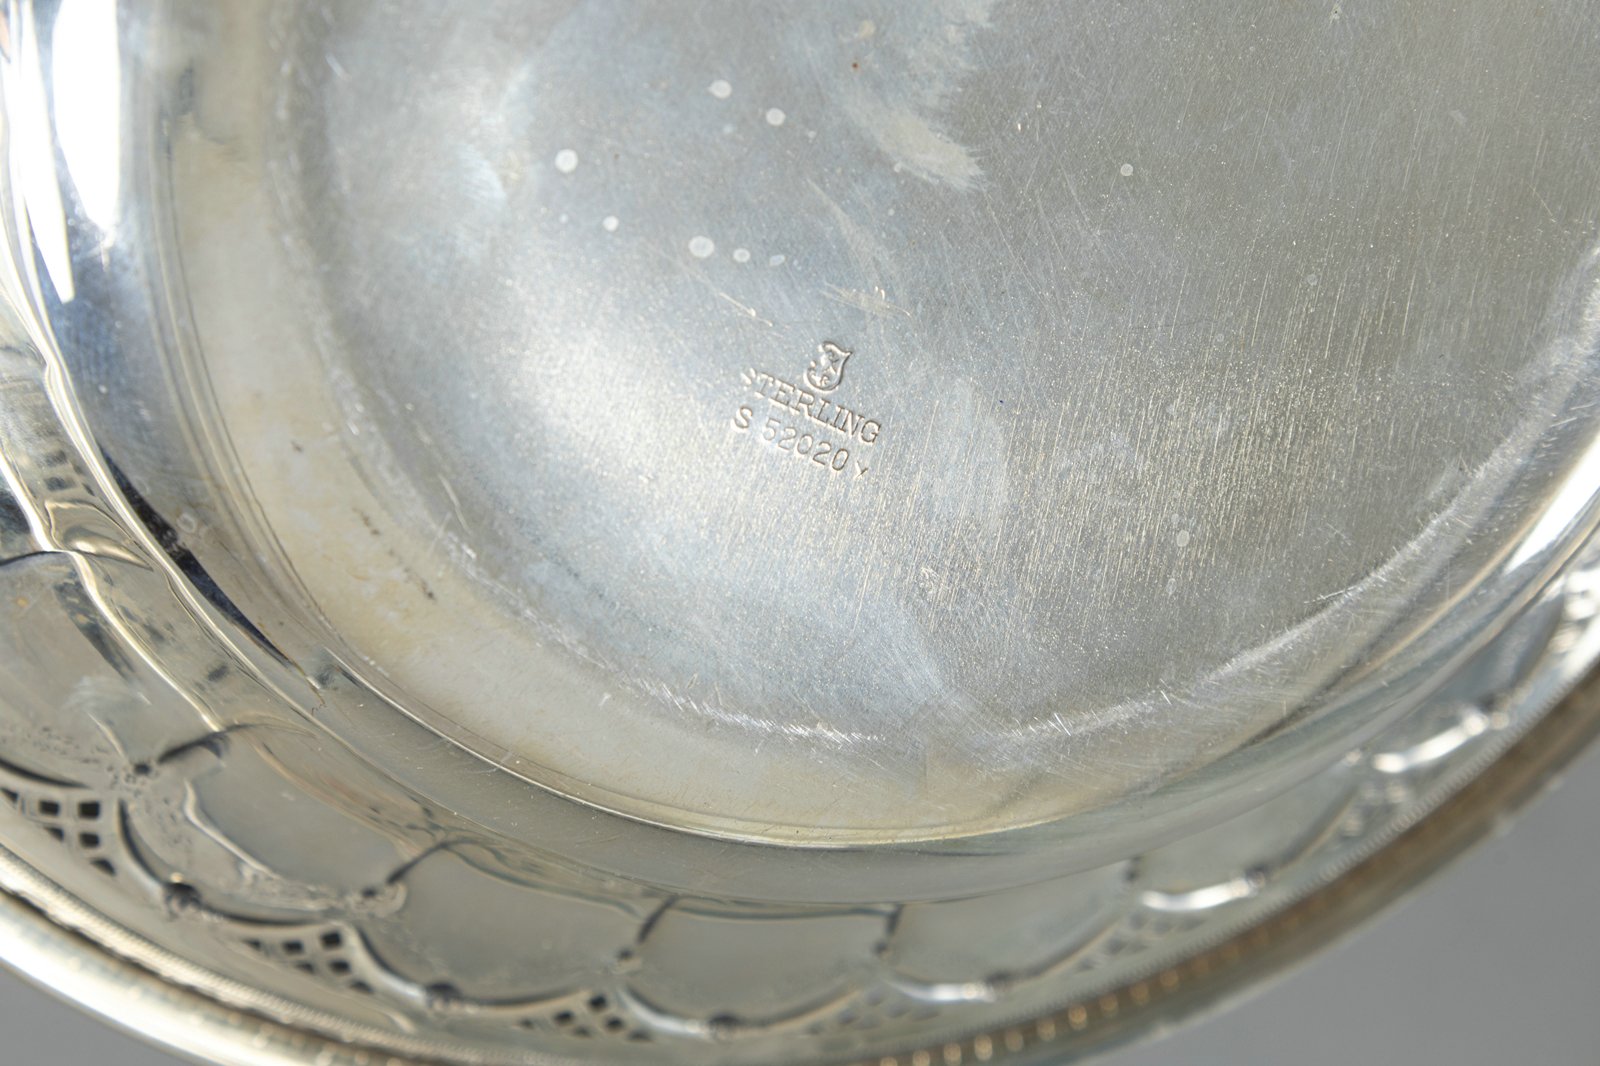 TWO FLORAL PATTERN SILVER BOWLS - Image 5 of 6